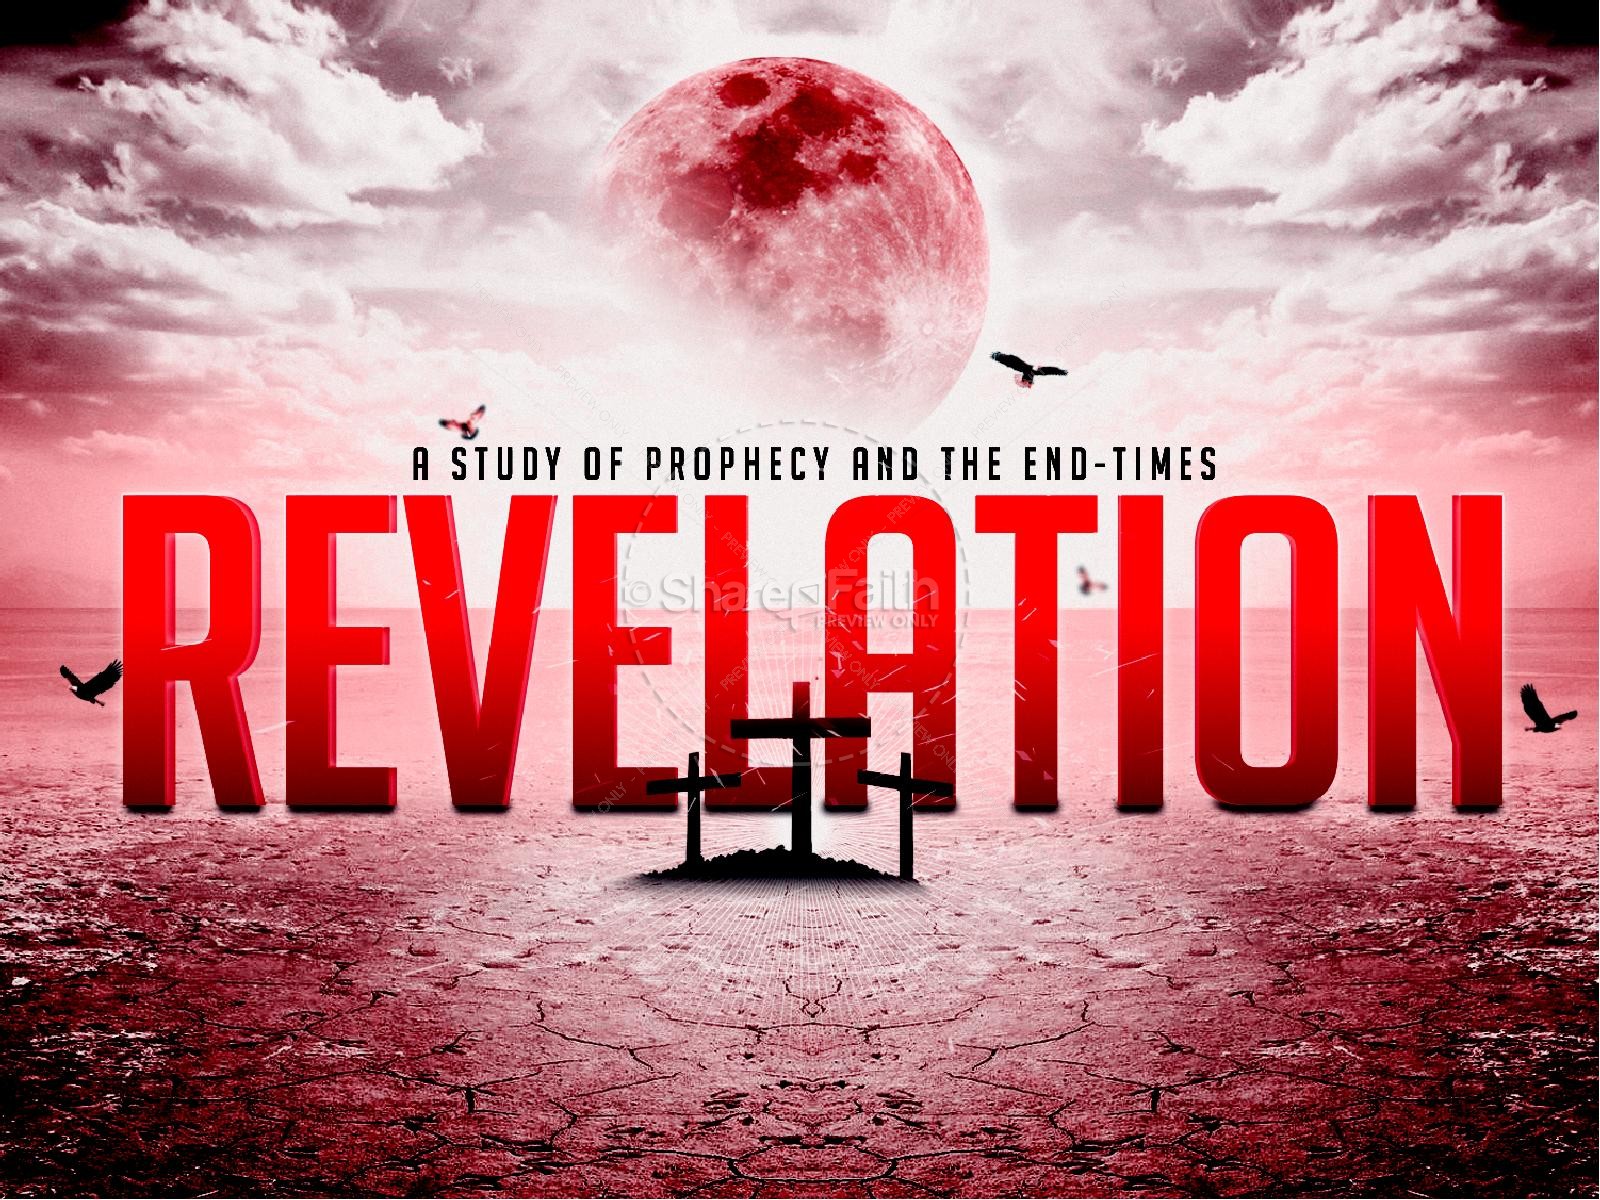 book of revelation clipart - photo #32